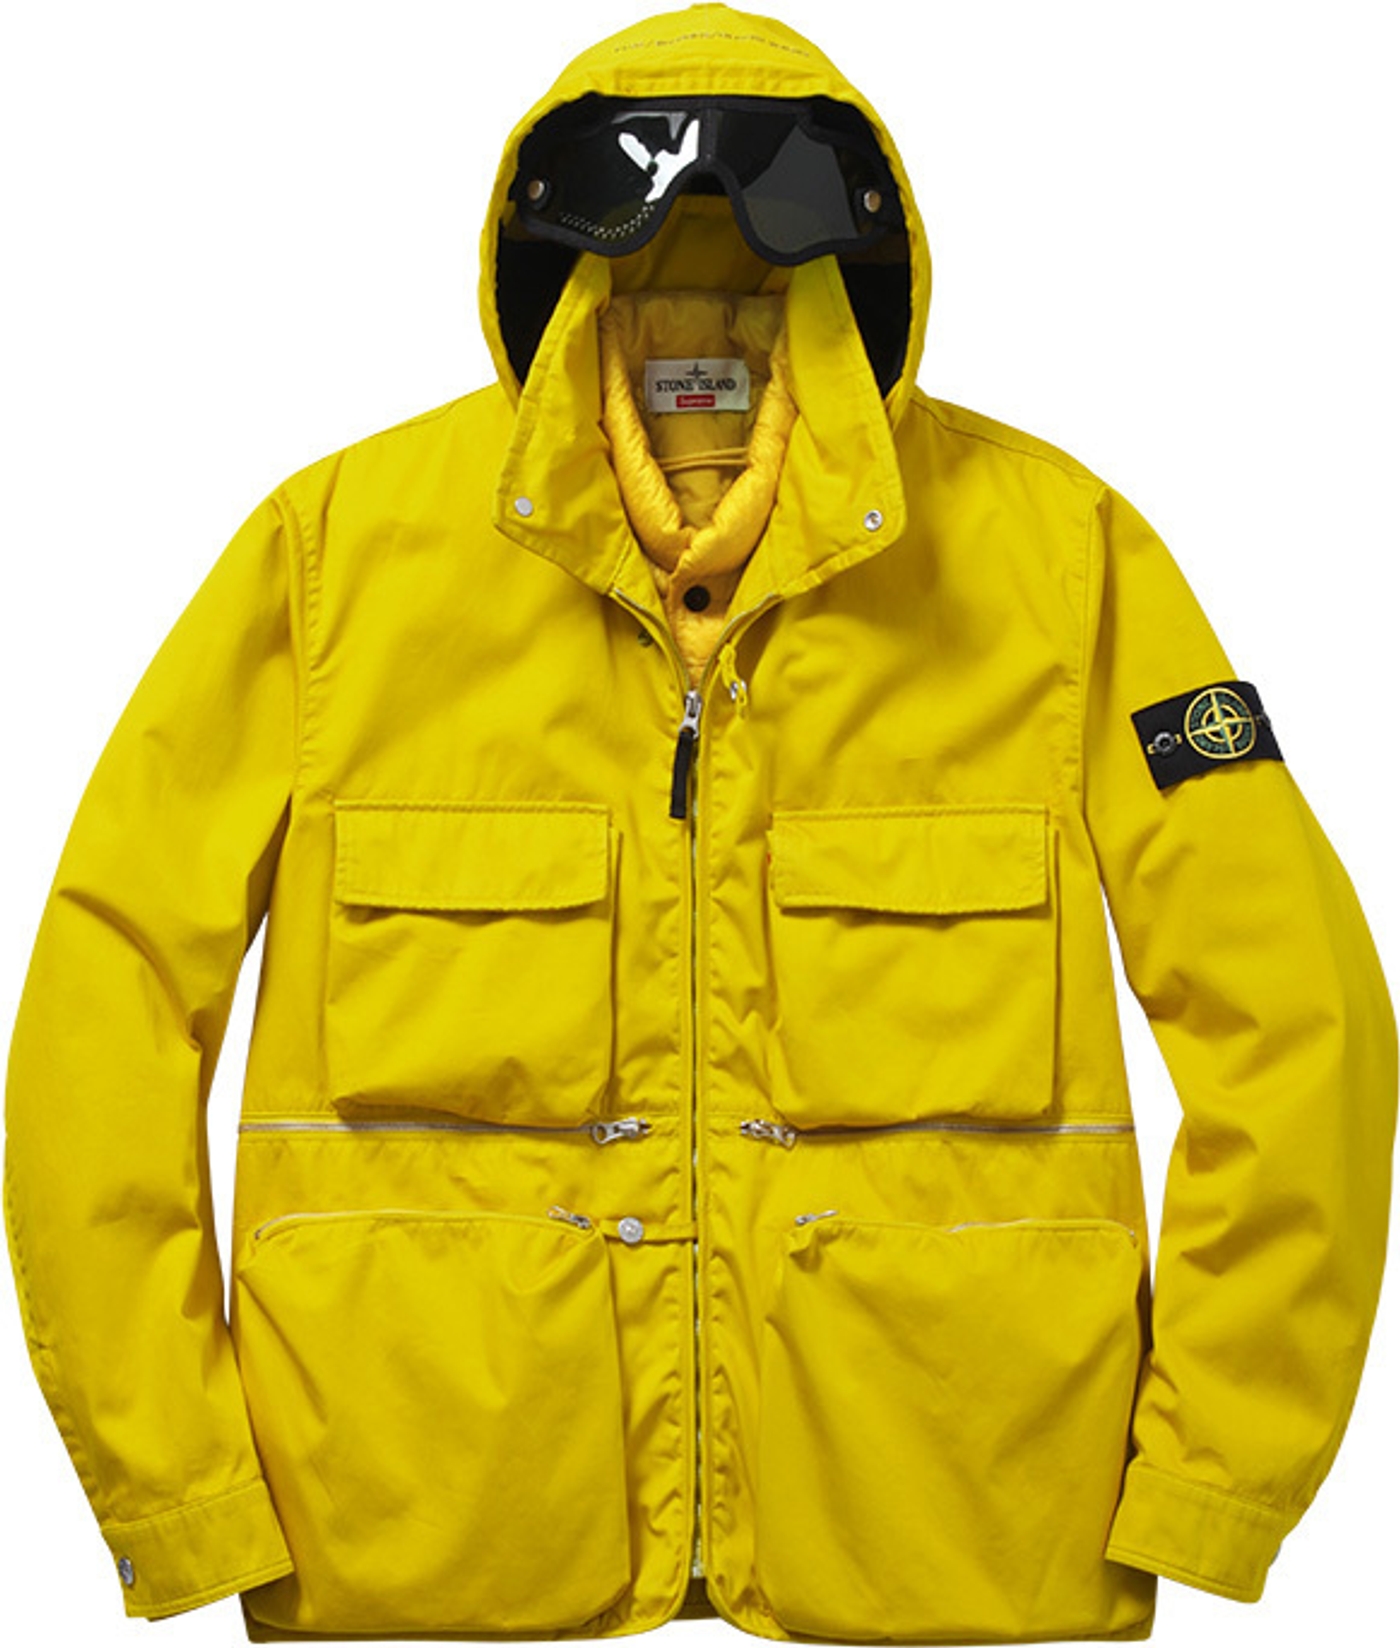 Raso Gommato Cover Nero Jacket 
Wind and water-resistant cotton with removable down liner. Removable eye mask with stow away hood.<br>
Made by Stone Island<br>
US $1,446/UK £950 (5/36)